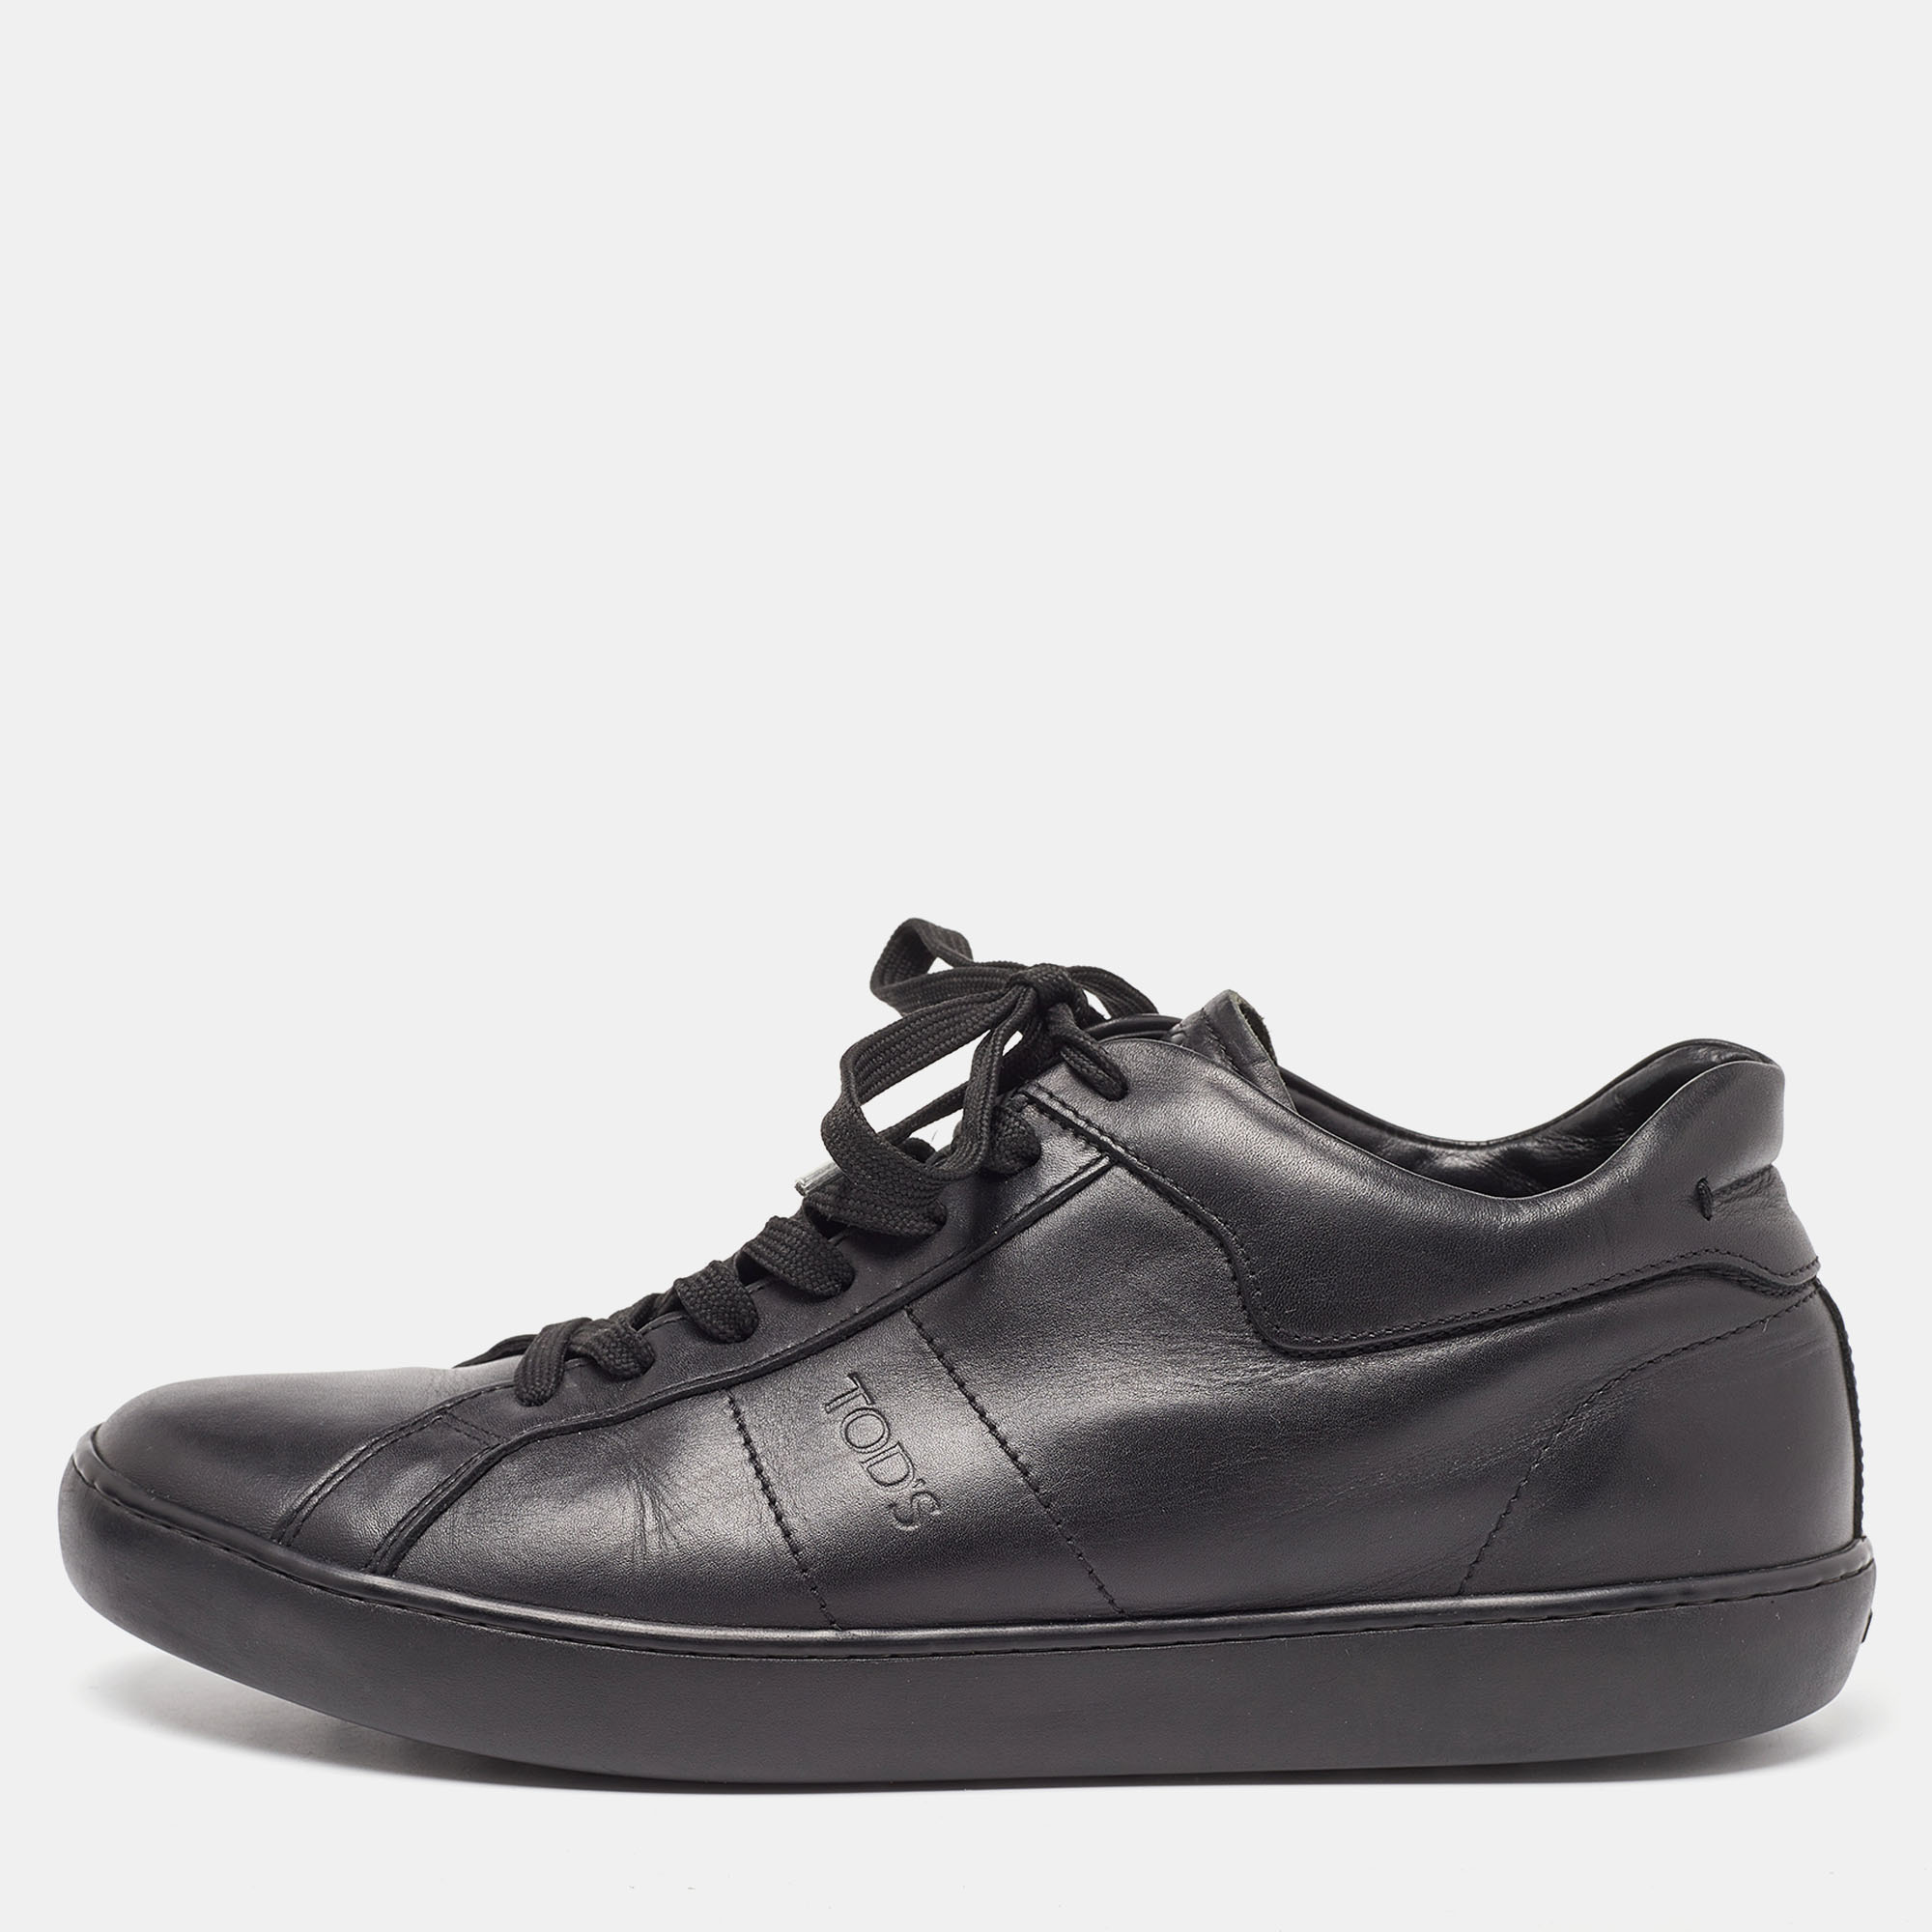 Tod's black leather low top sneakers size 44